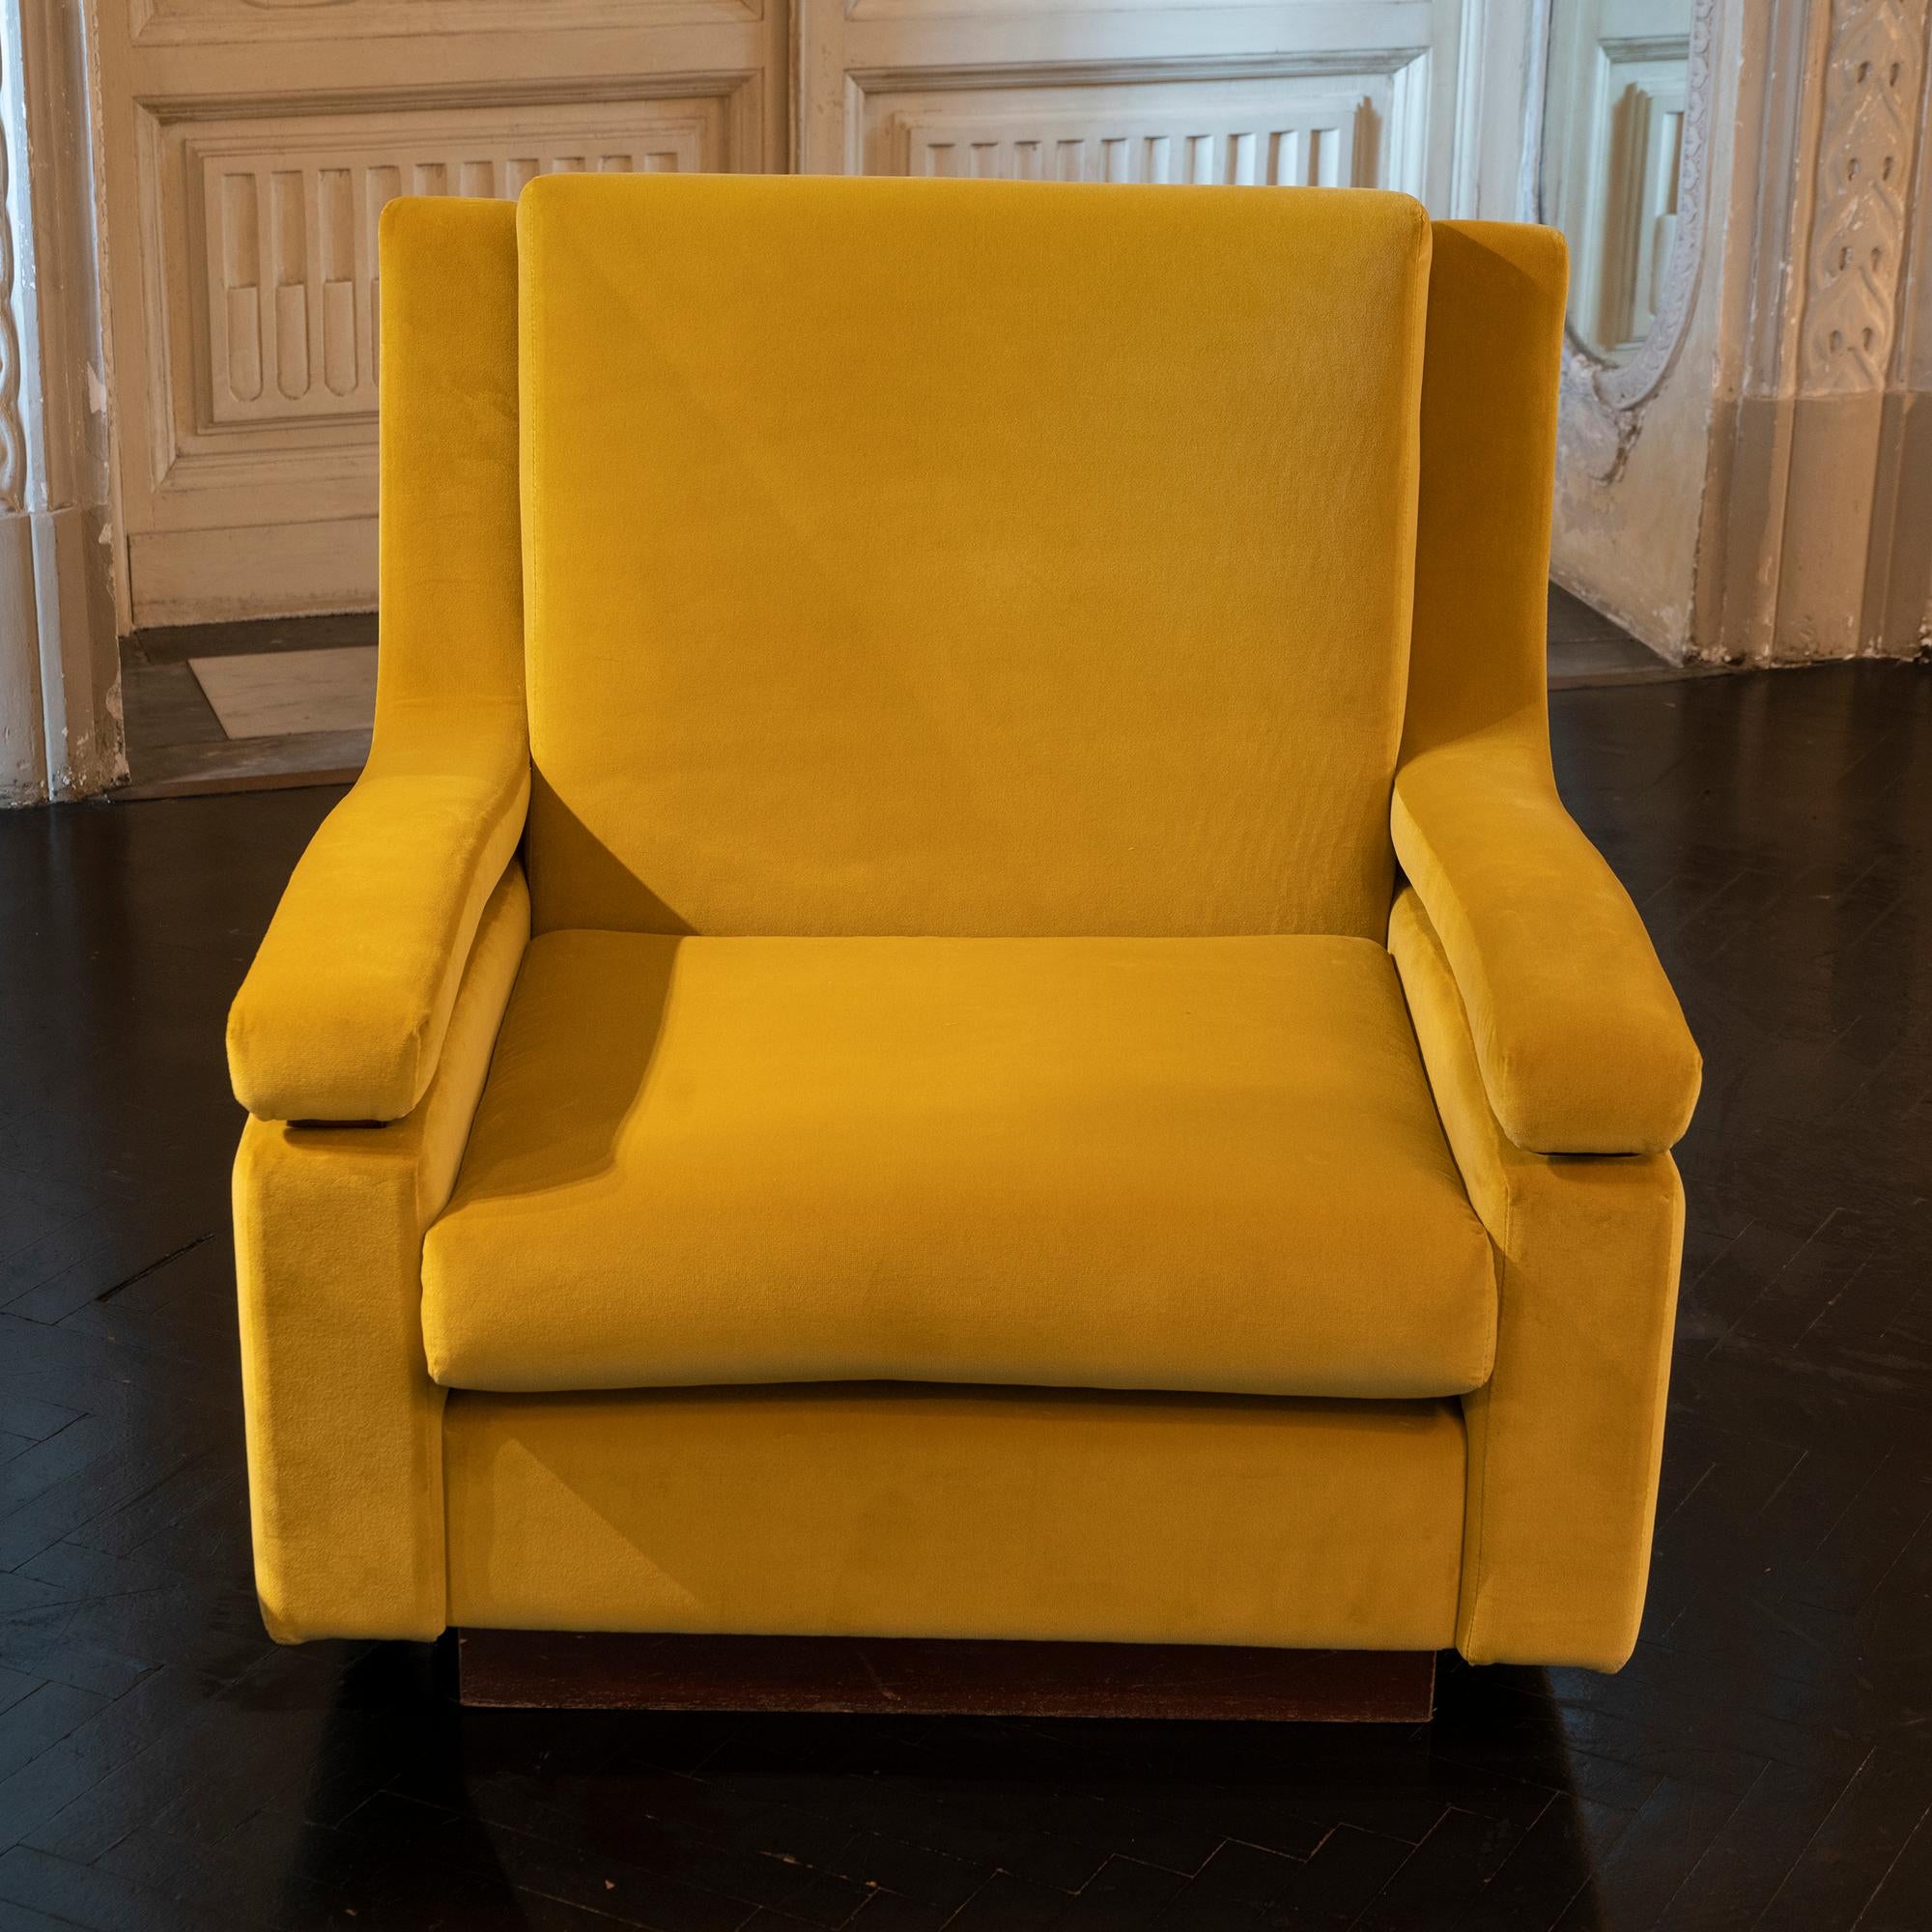 Pair of armchairs upholstered in mustard yellow velvet and wood details, perfect condition and vintage patina, Italy, circa 1950s.